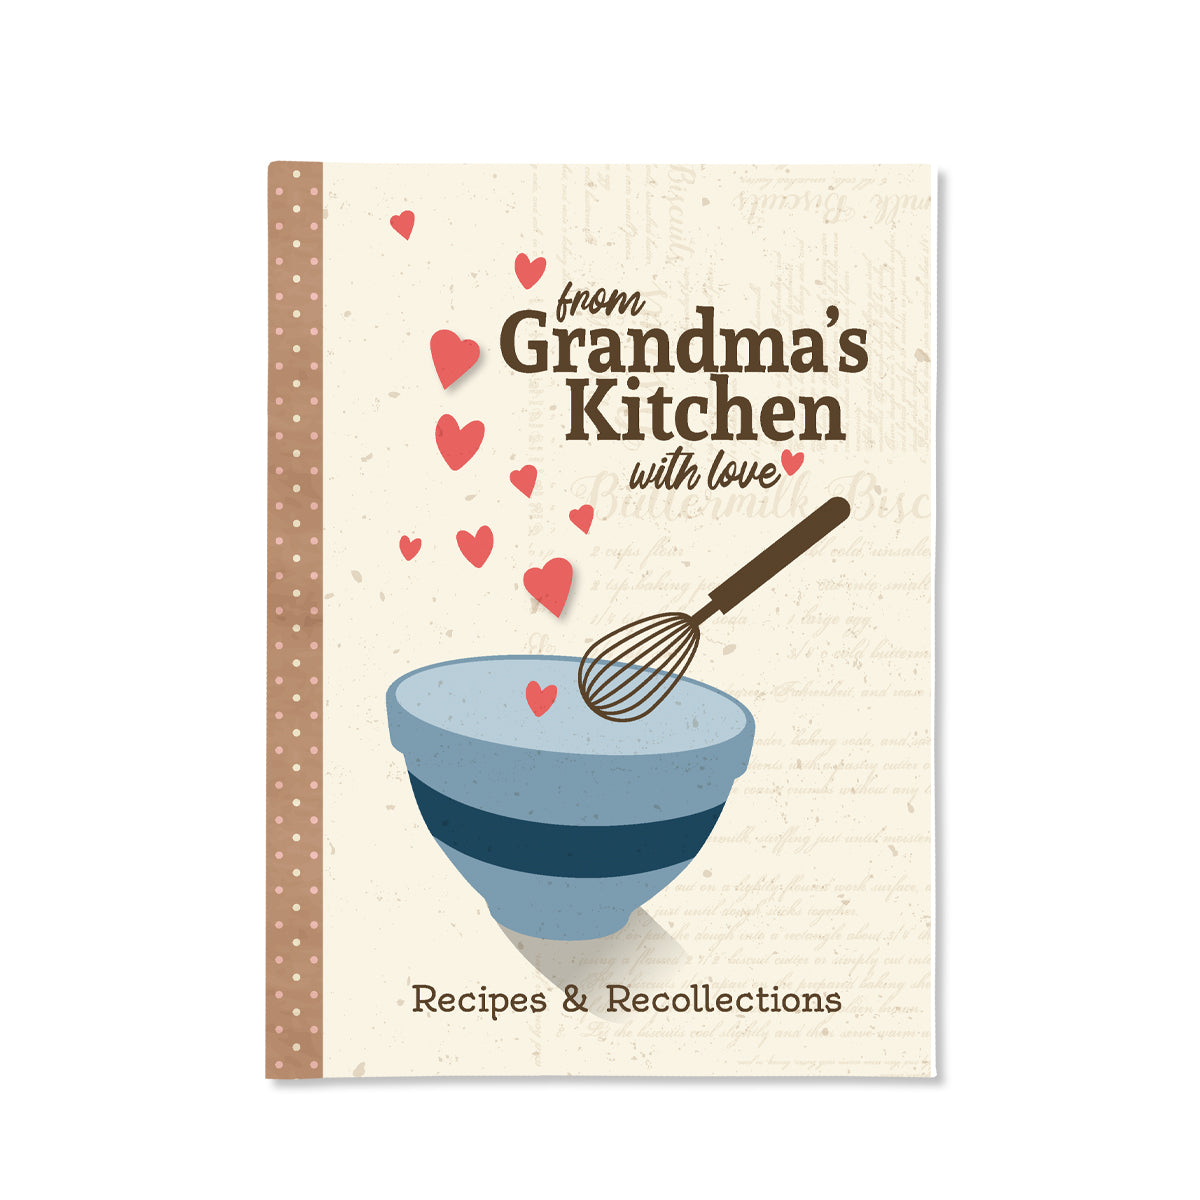 Front cover of "From Grandma's Kitchen"